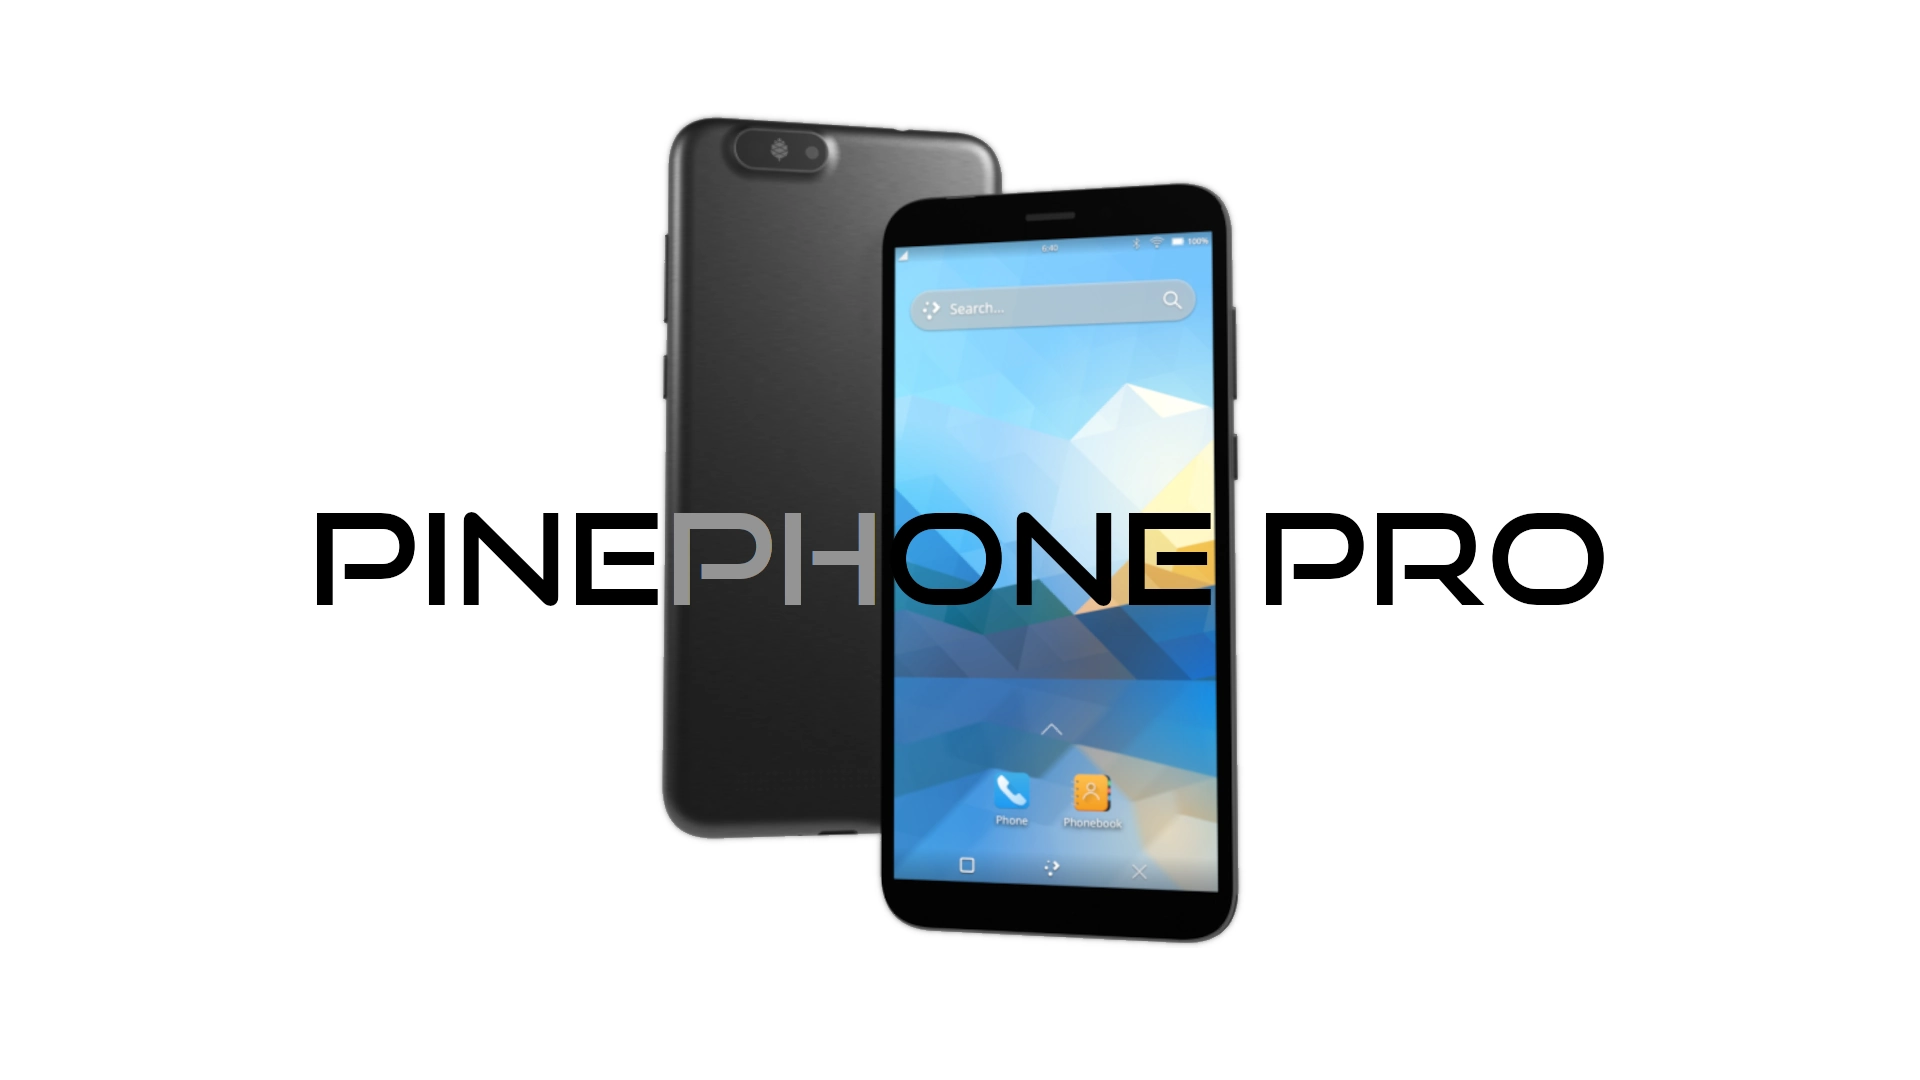 You Can Now Pre-Order the PinePhone Pro Explorer Edition Linux Smartphone